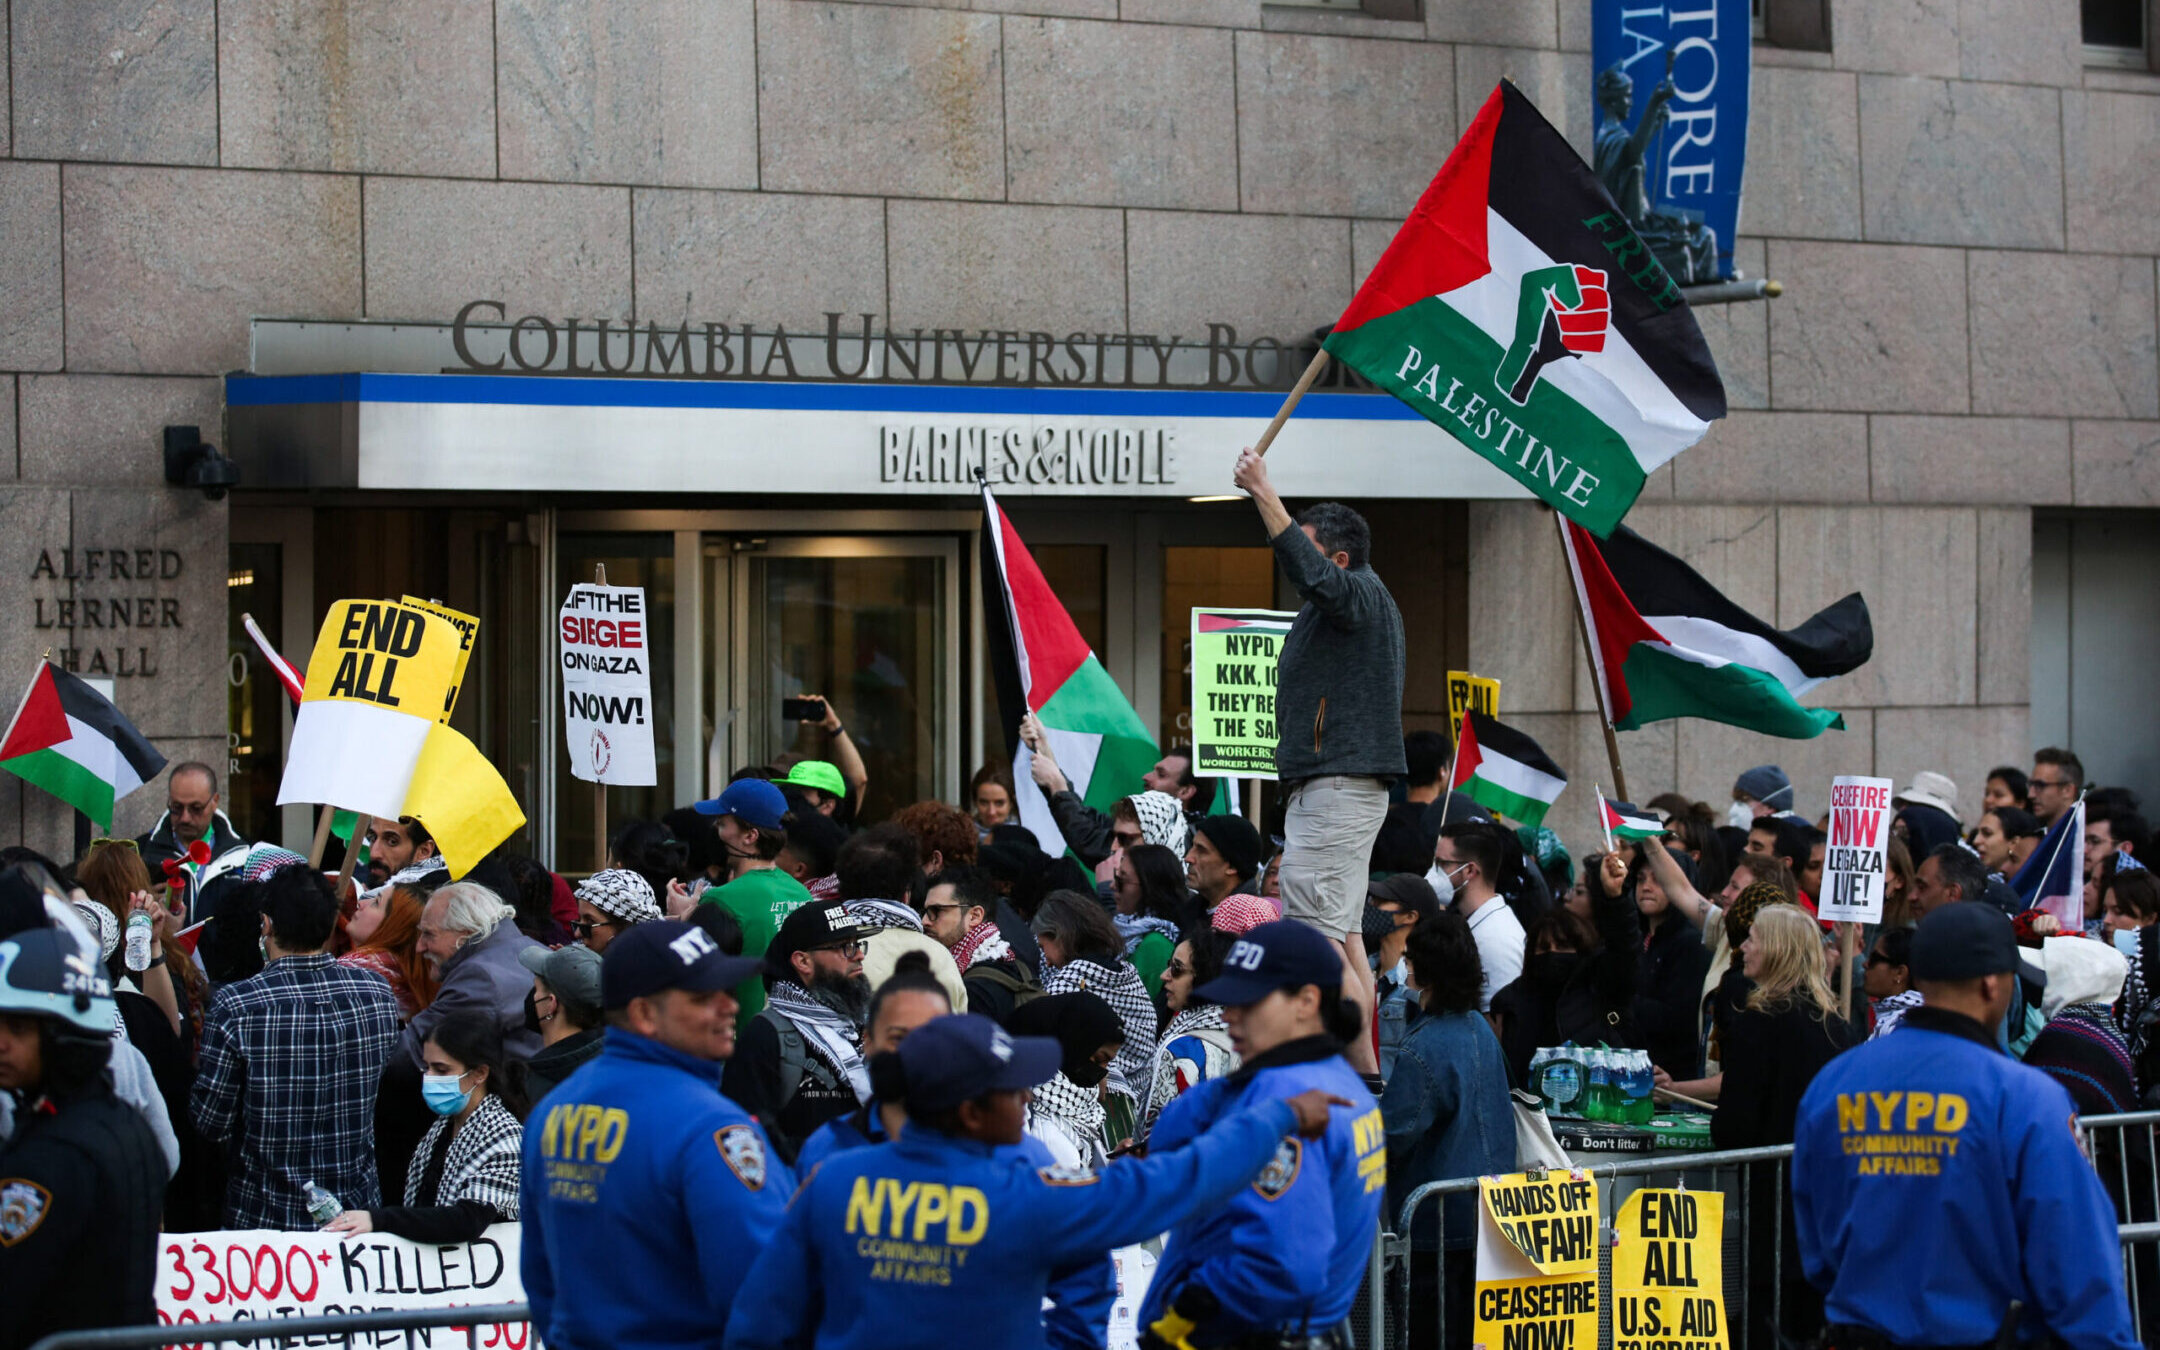 Pro-Palestinian activists protest outside Columbia University in New York City April 20.